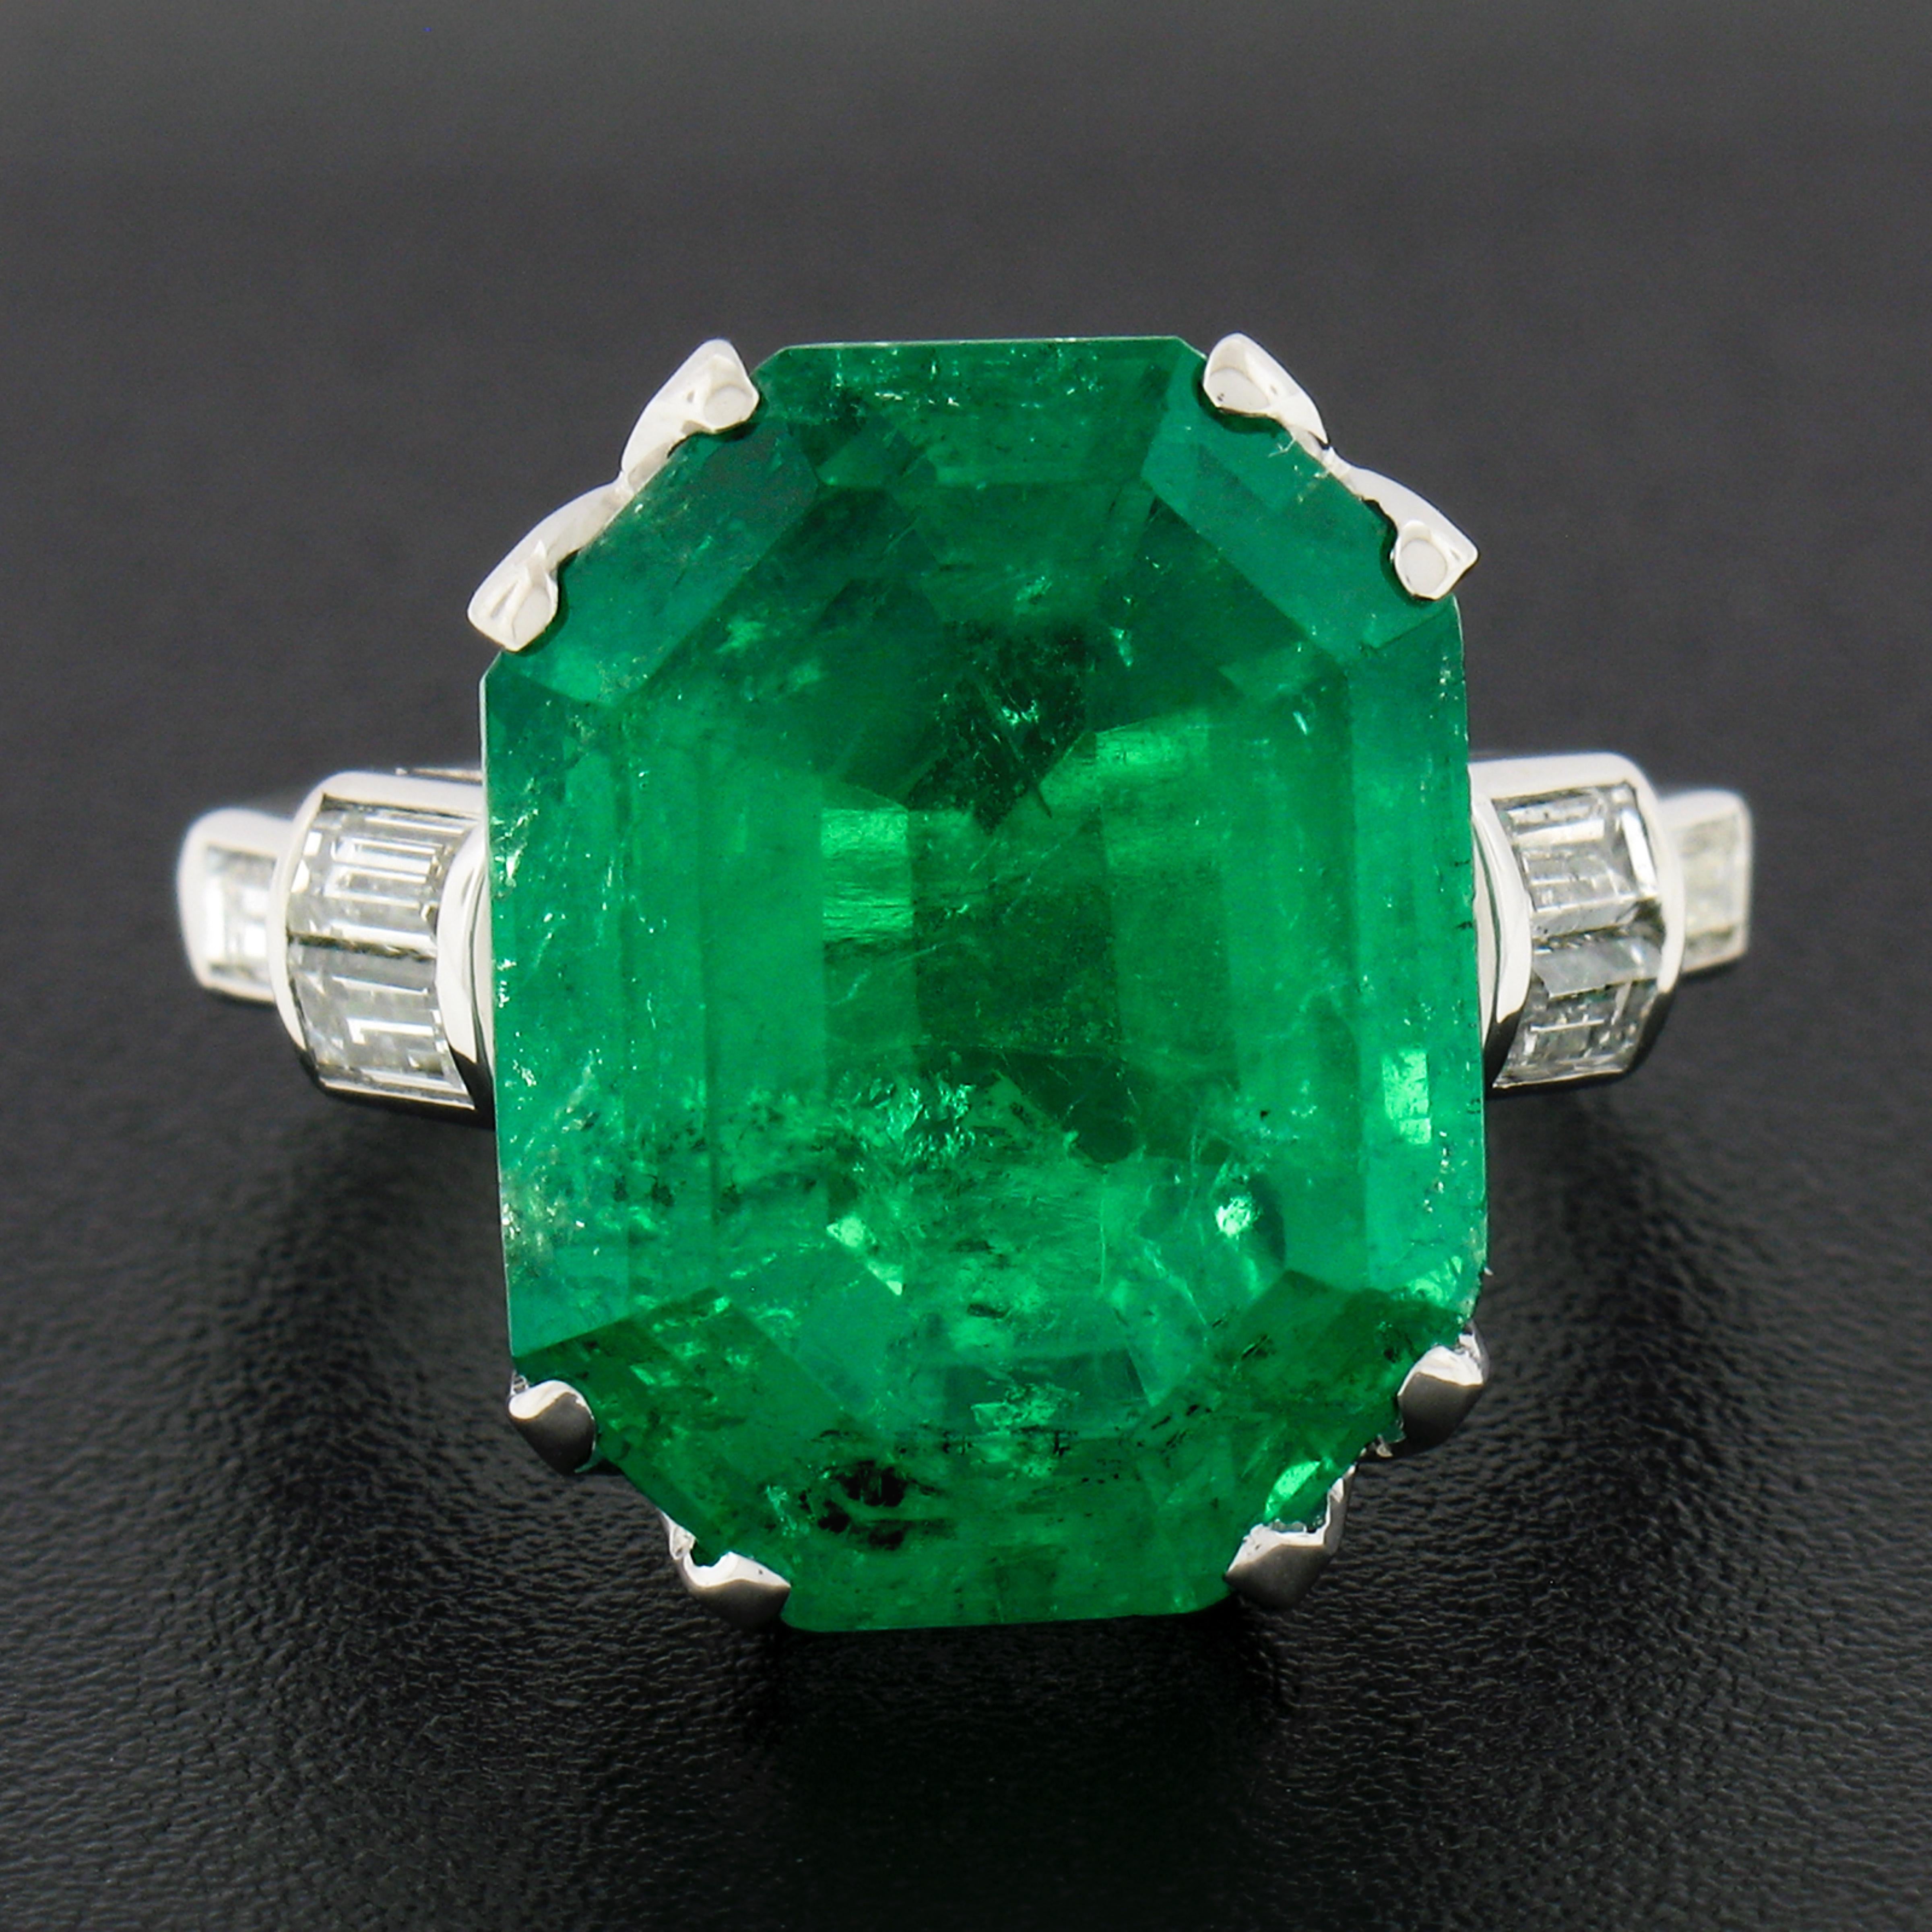 Vintage Platinum 12.16ct AGL Emerald Cut Colombian Emerald Diamond Cocktail Ring In Excellent Condition For Sale In Montclair, NJ